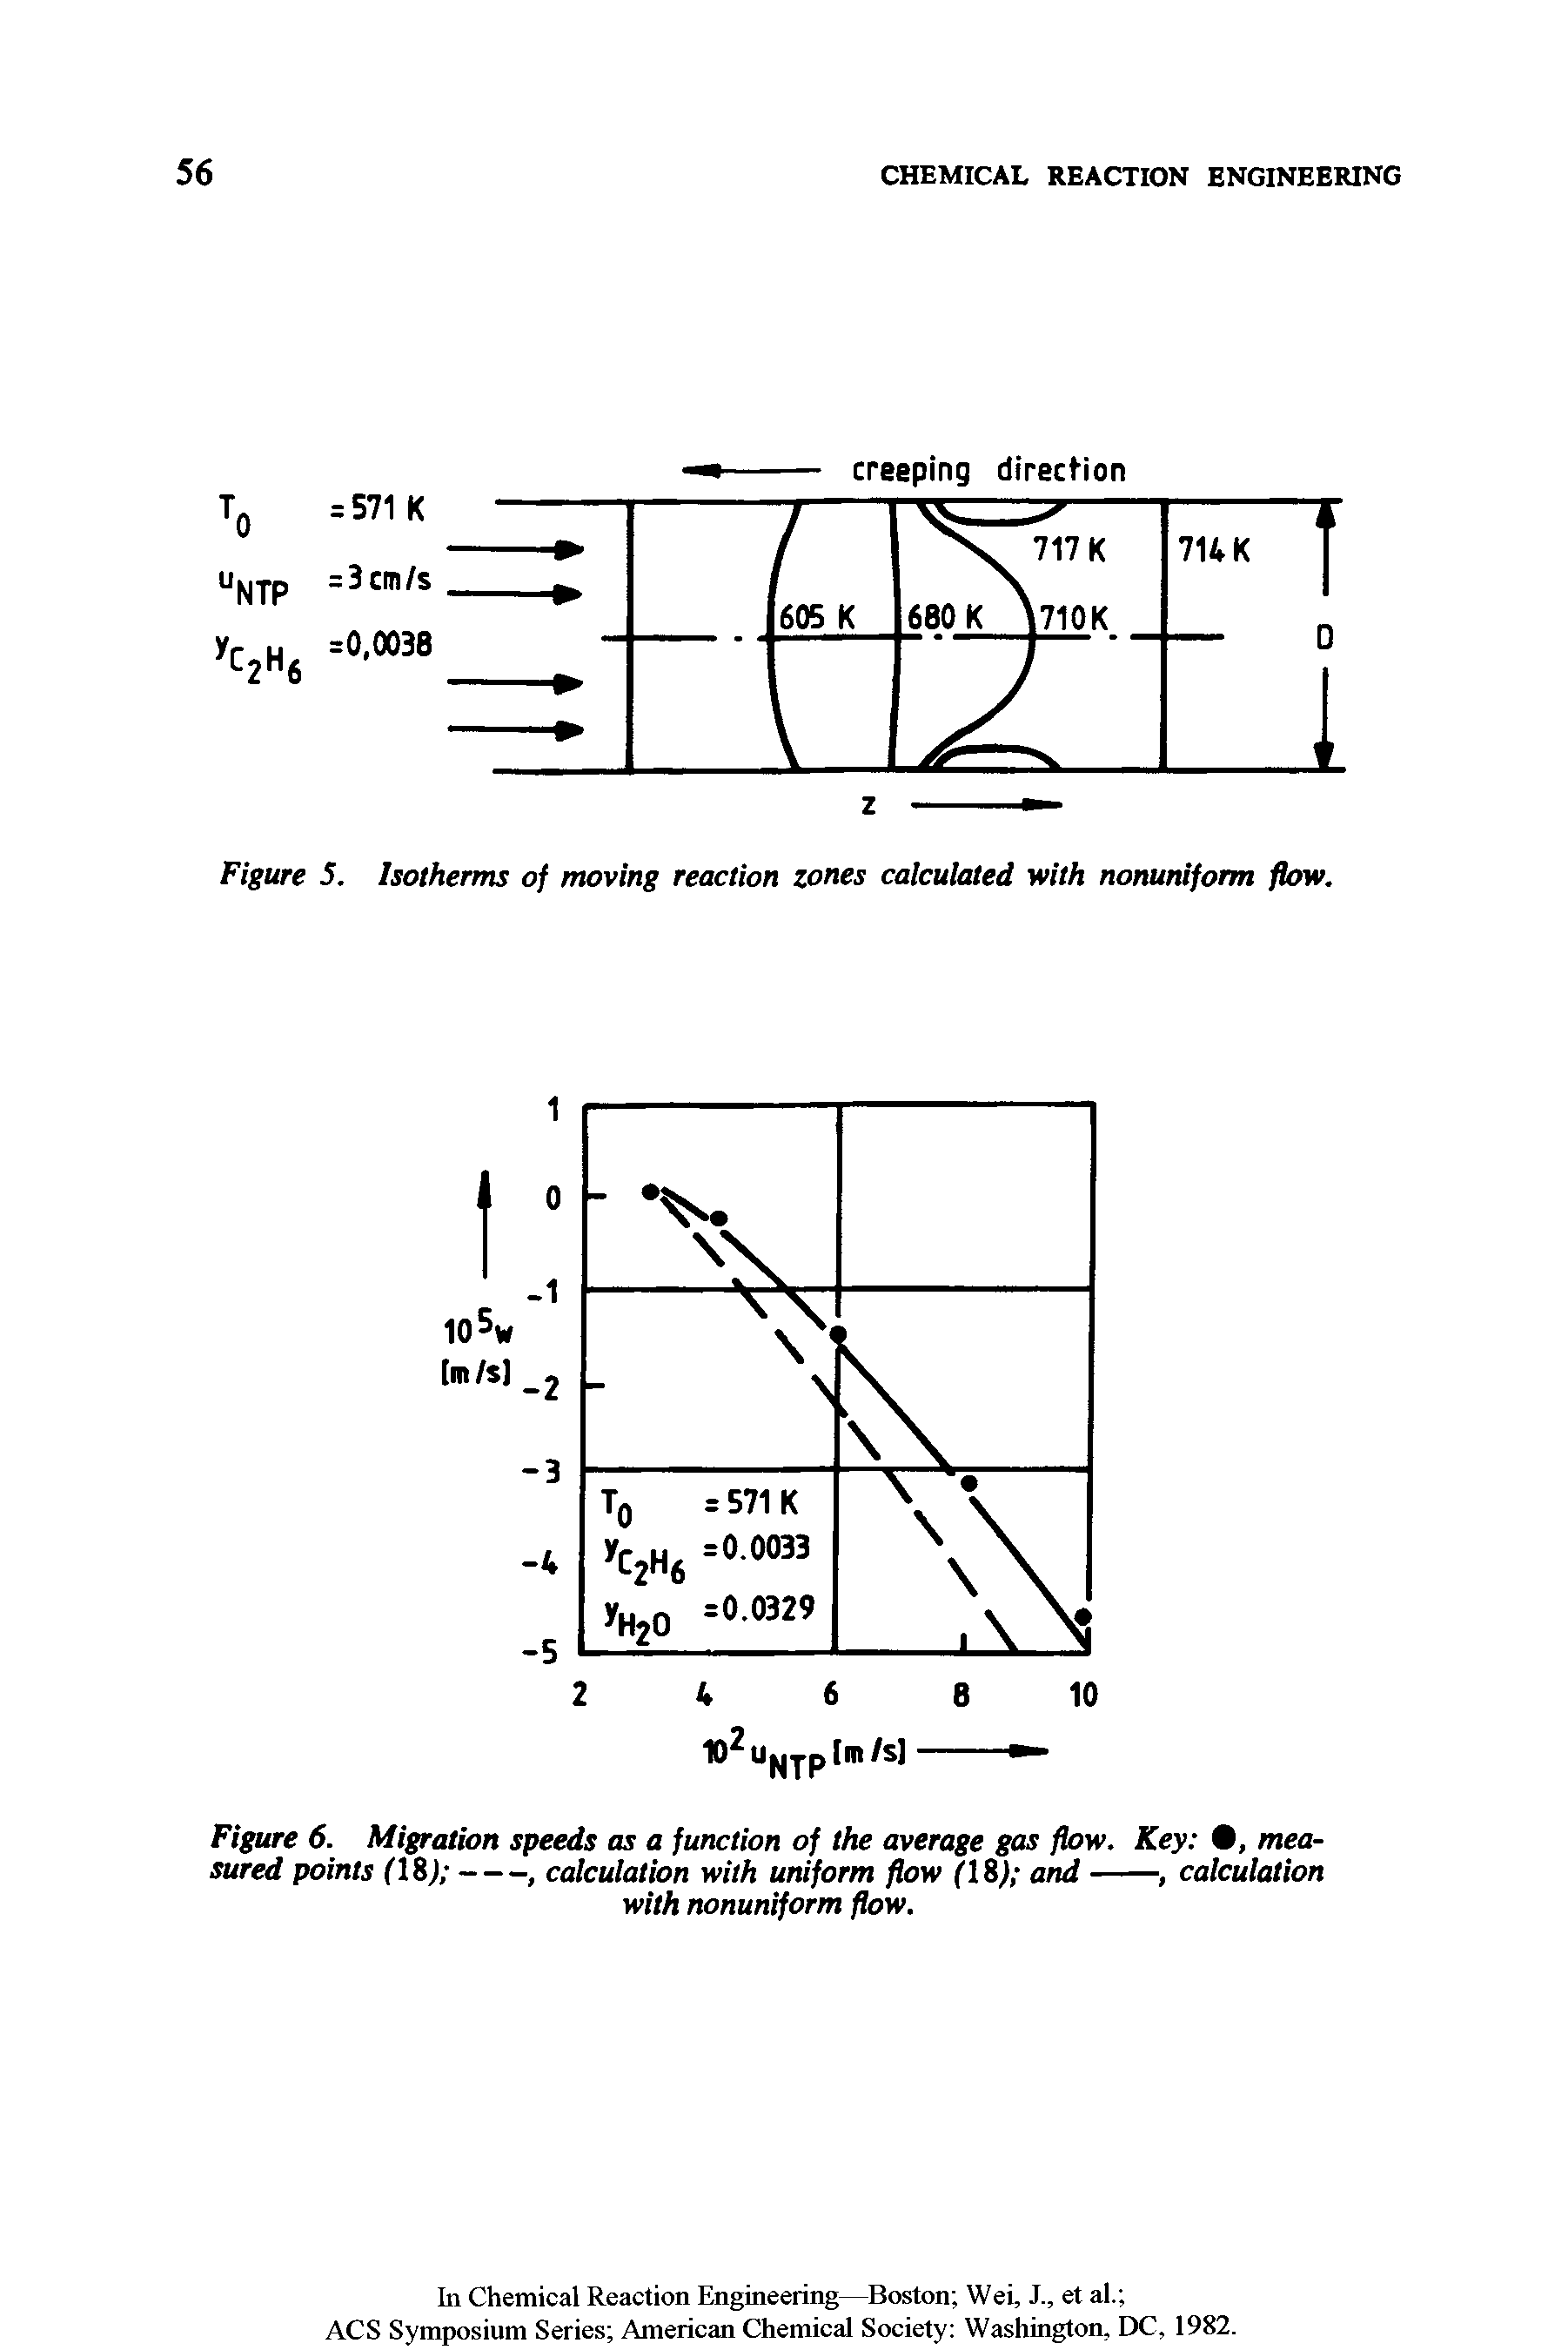 Figure S. Isotherms of moving reaction zones calculated with nonuniform flow.